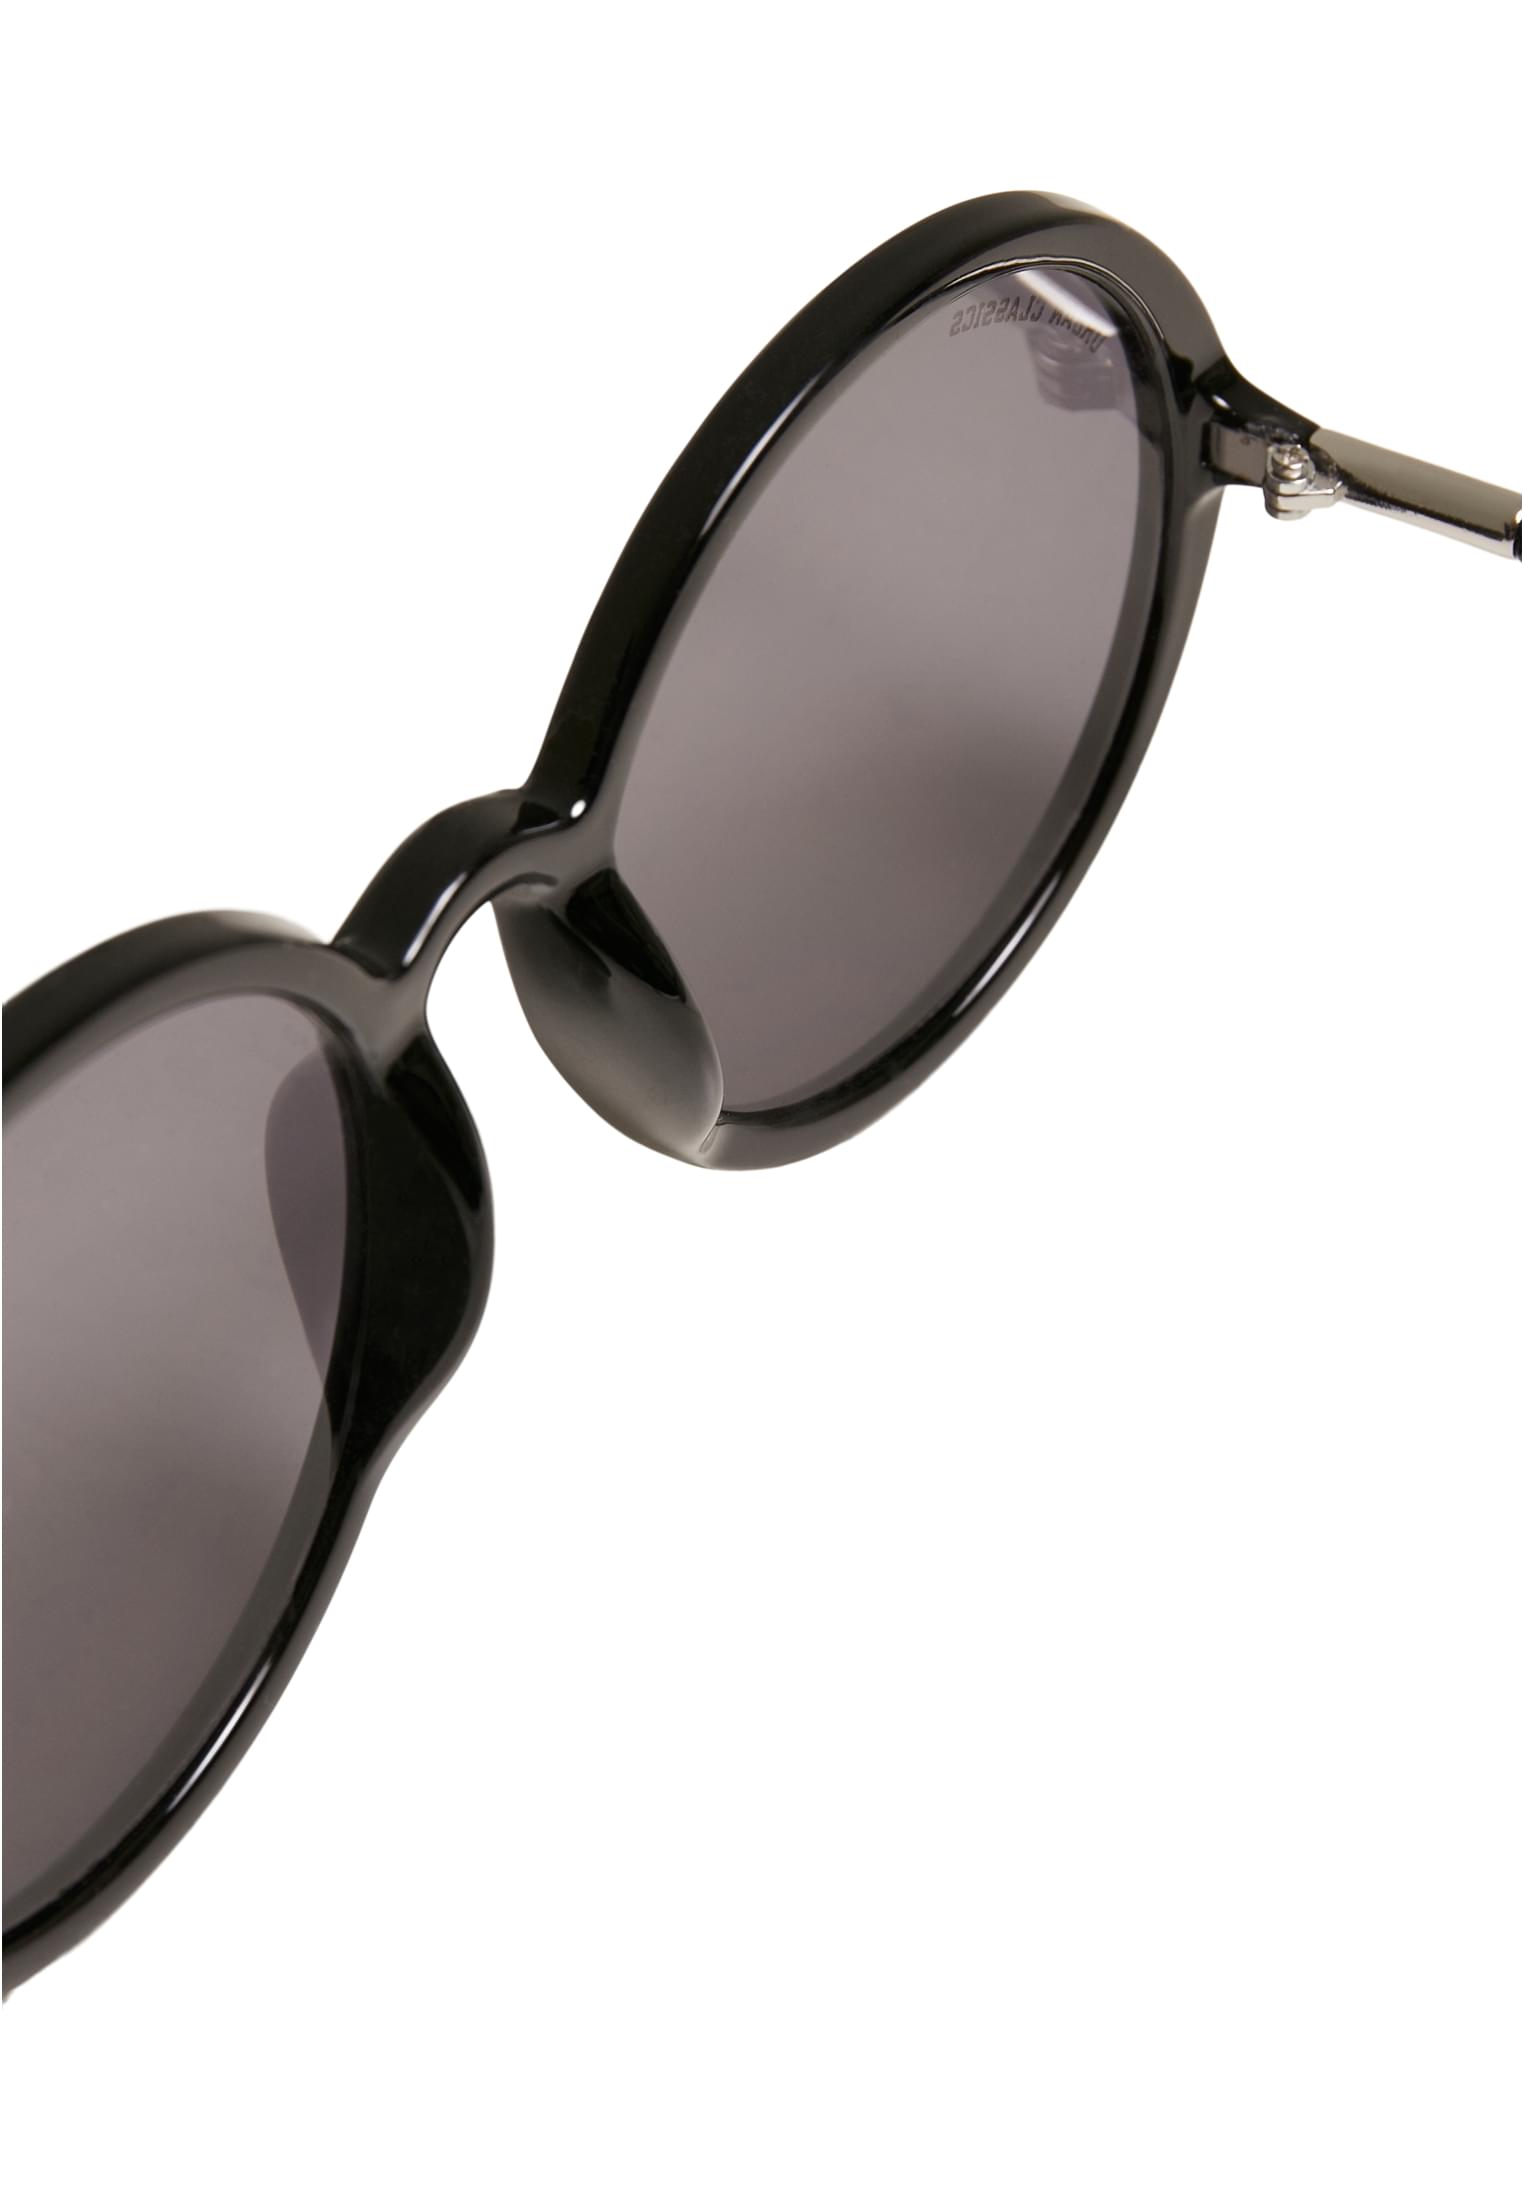 Sunglasses Cannes with Chain-TB4852